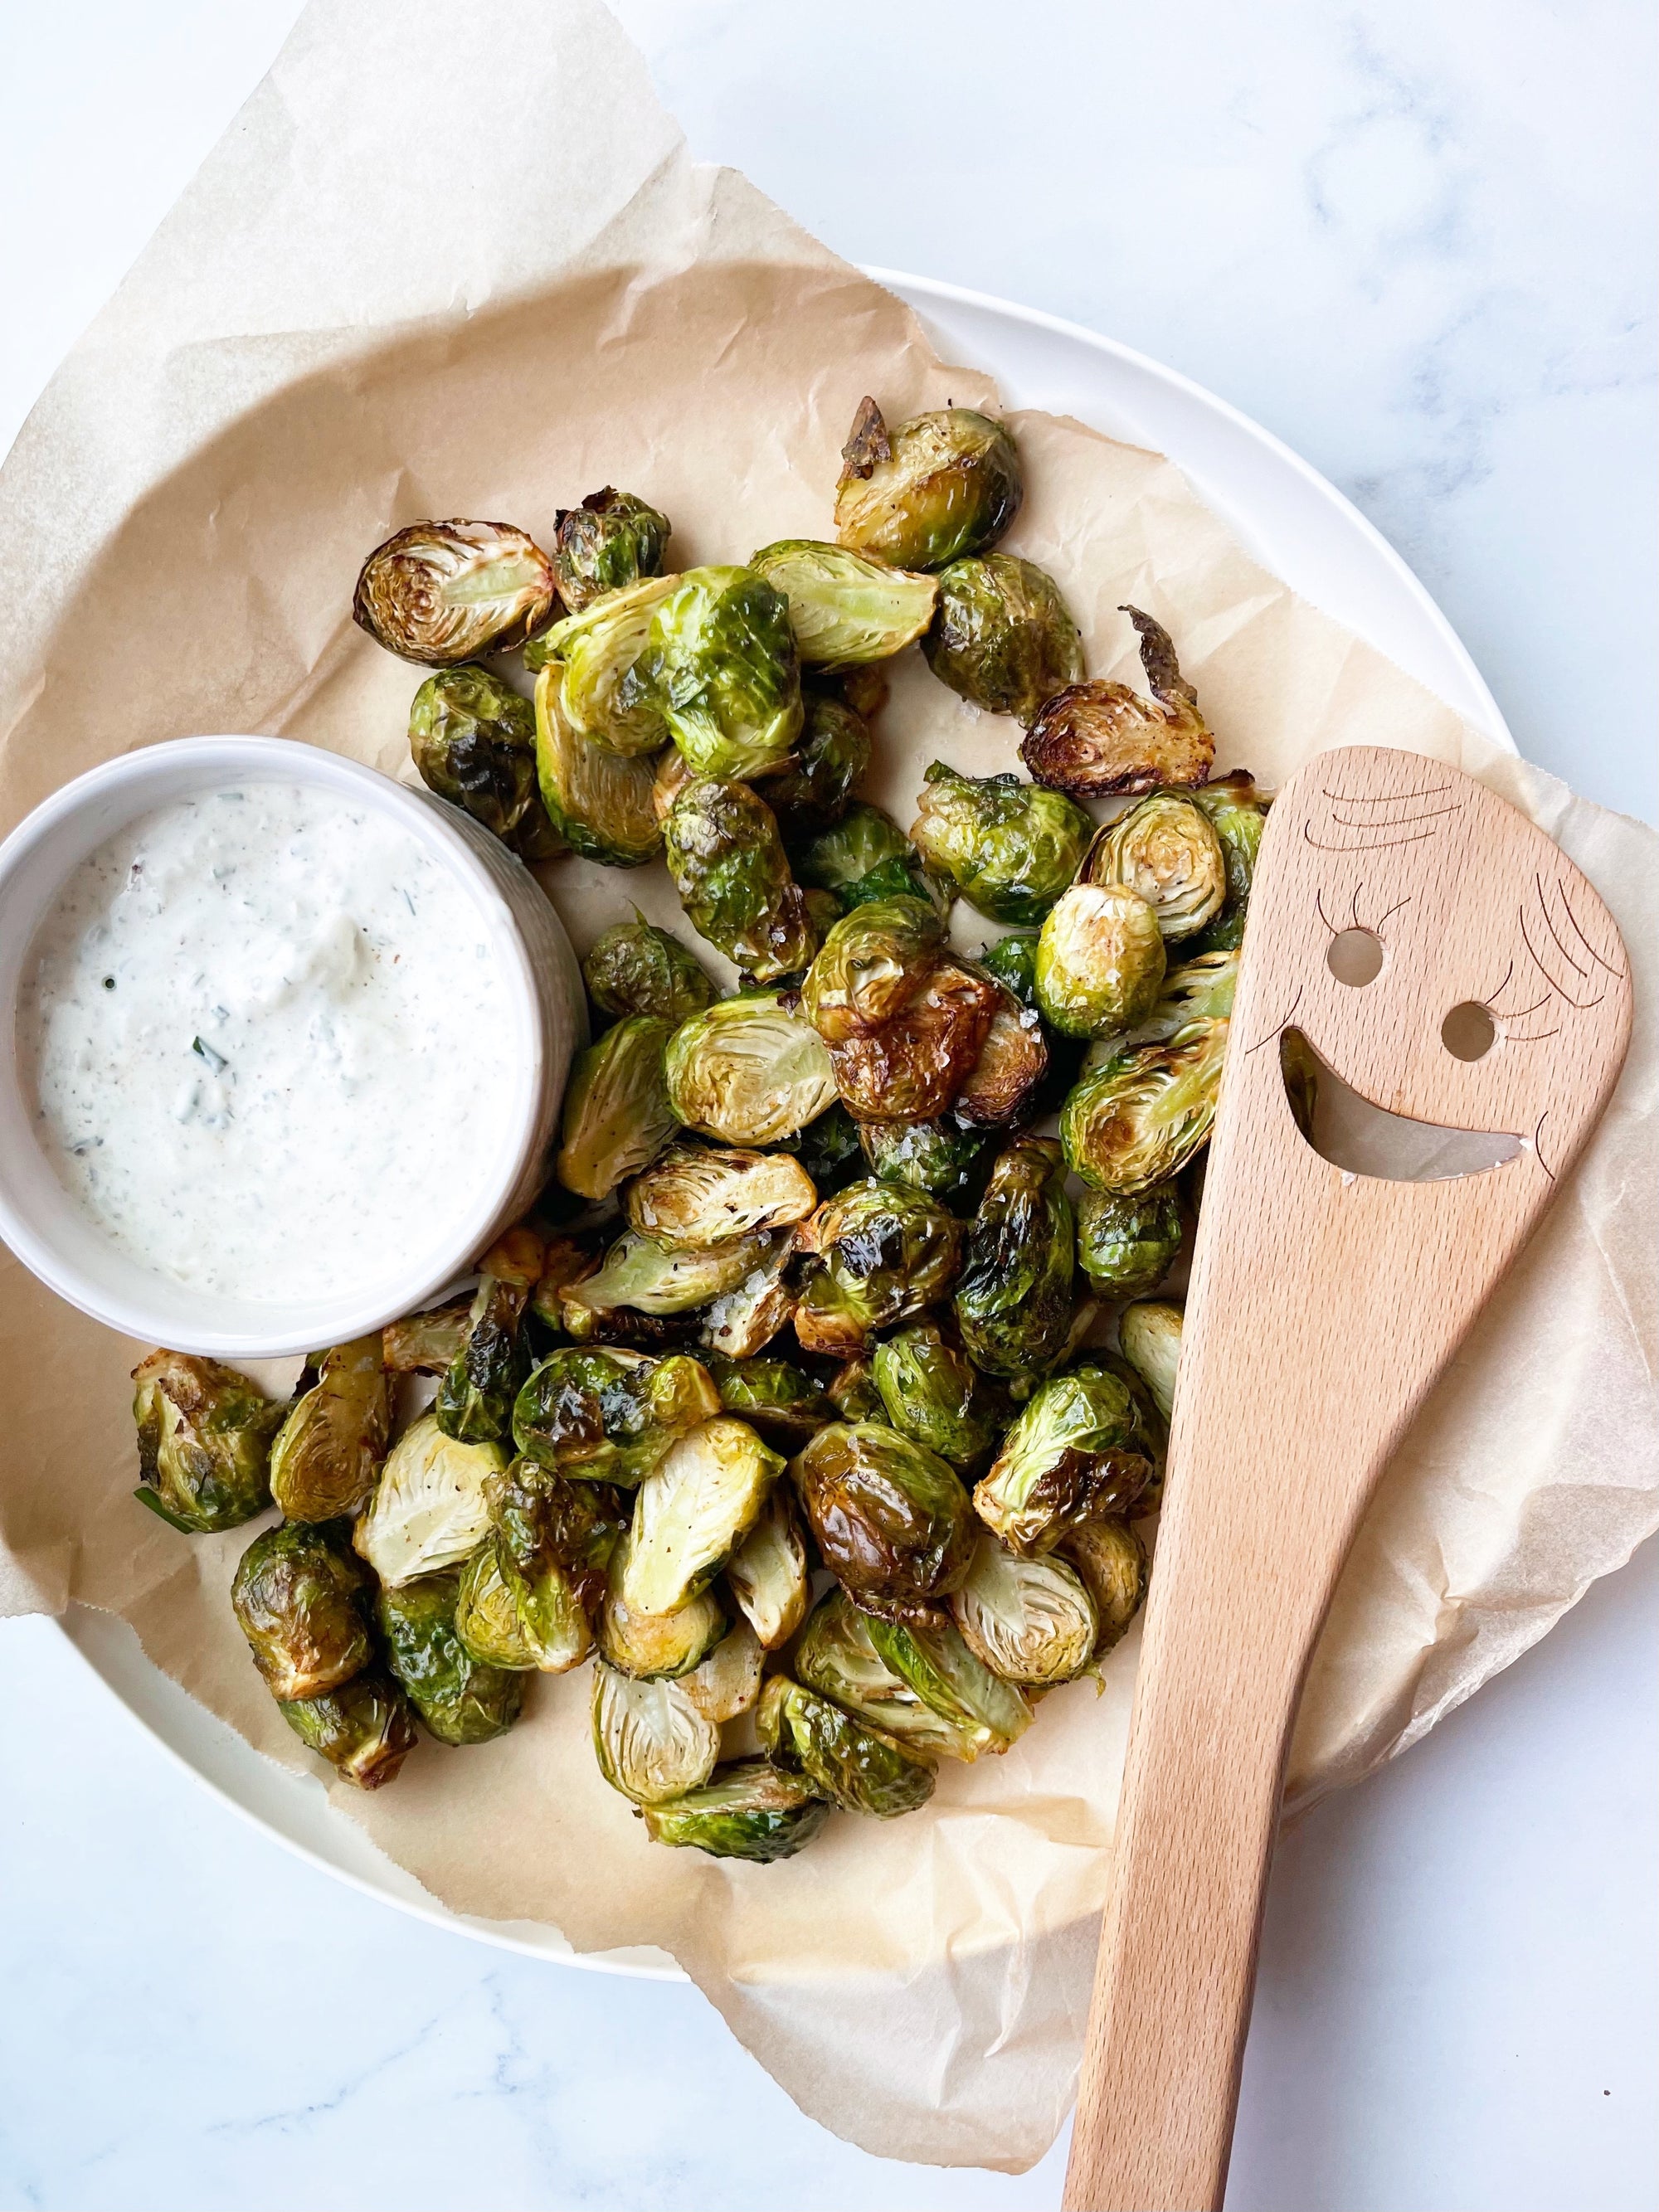 Crispy Brussels Sprouts with Green Goddess Dip